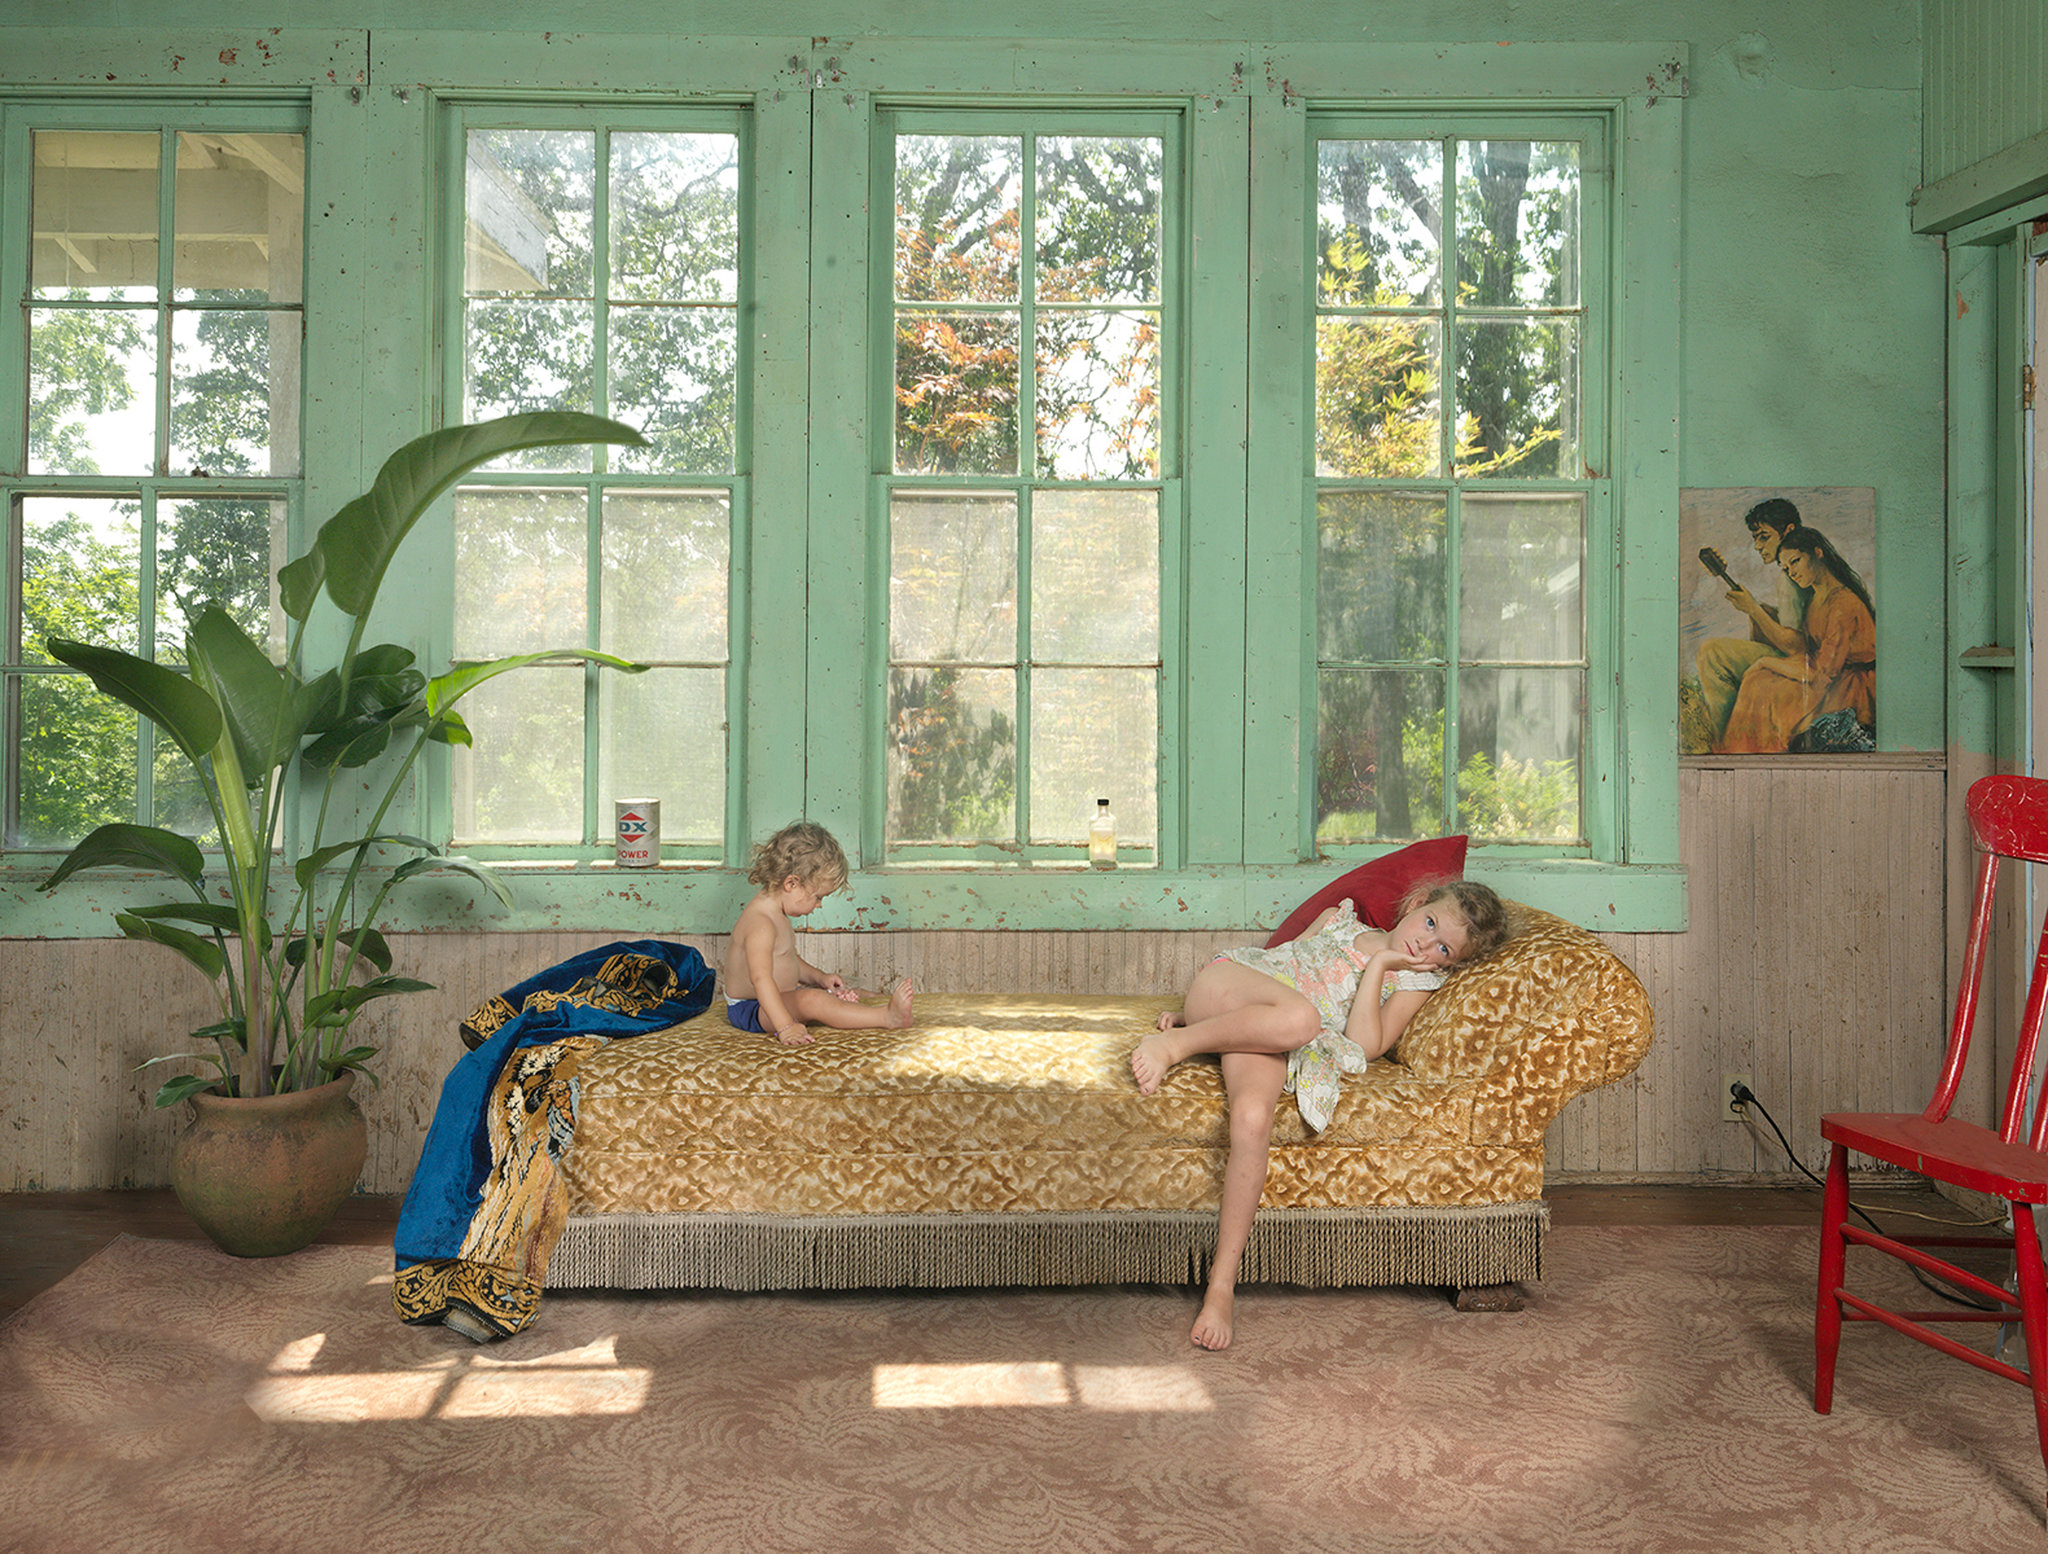 the new york times witty irreverent photos that satirize family living